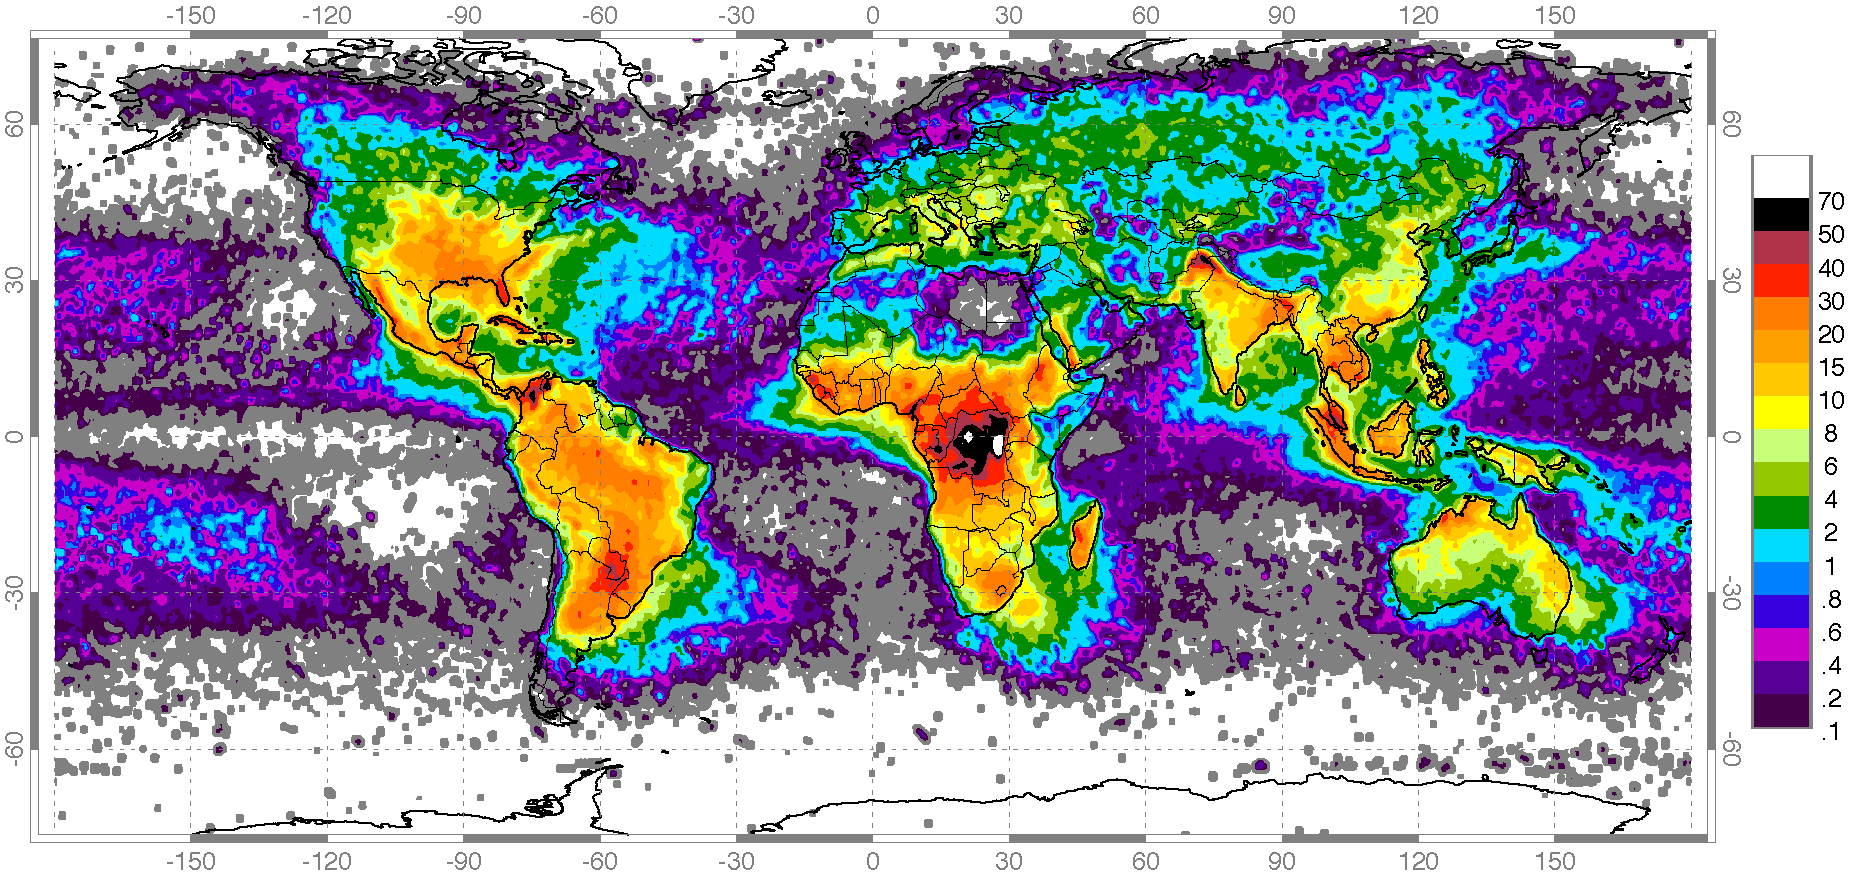 Map showing the frequency of lightning strikes throughout the world.